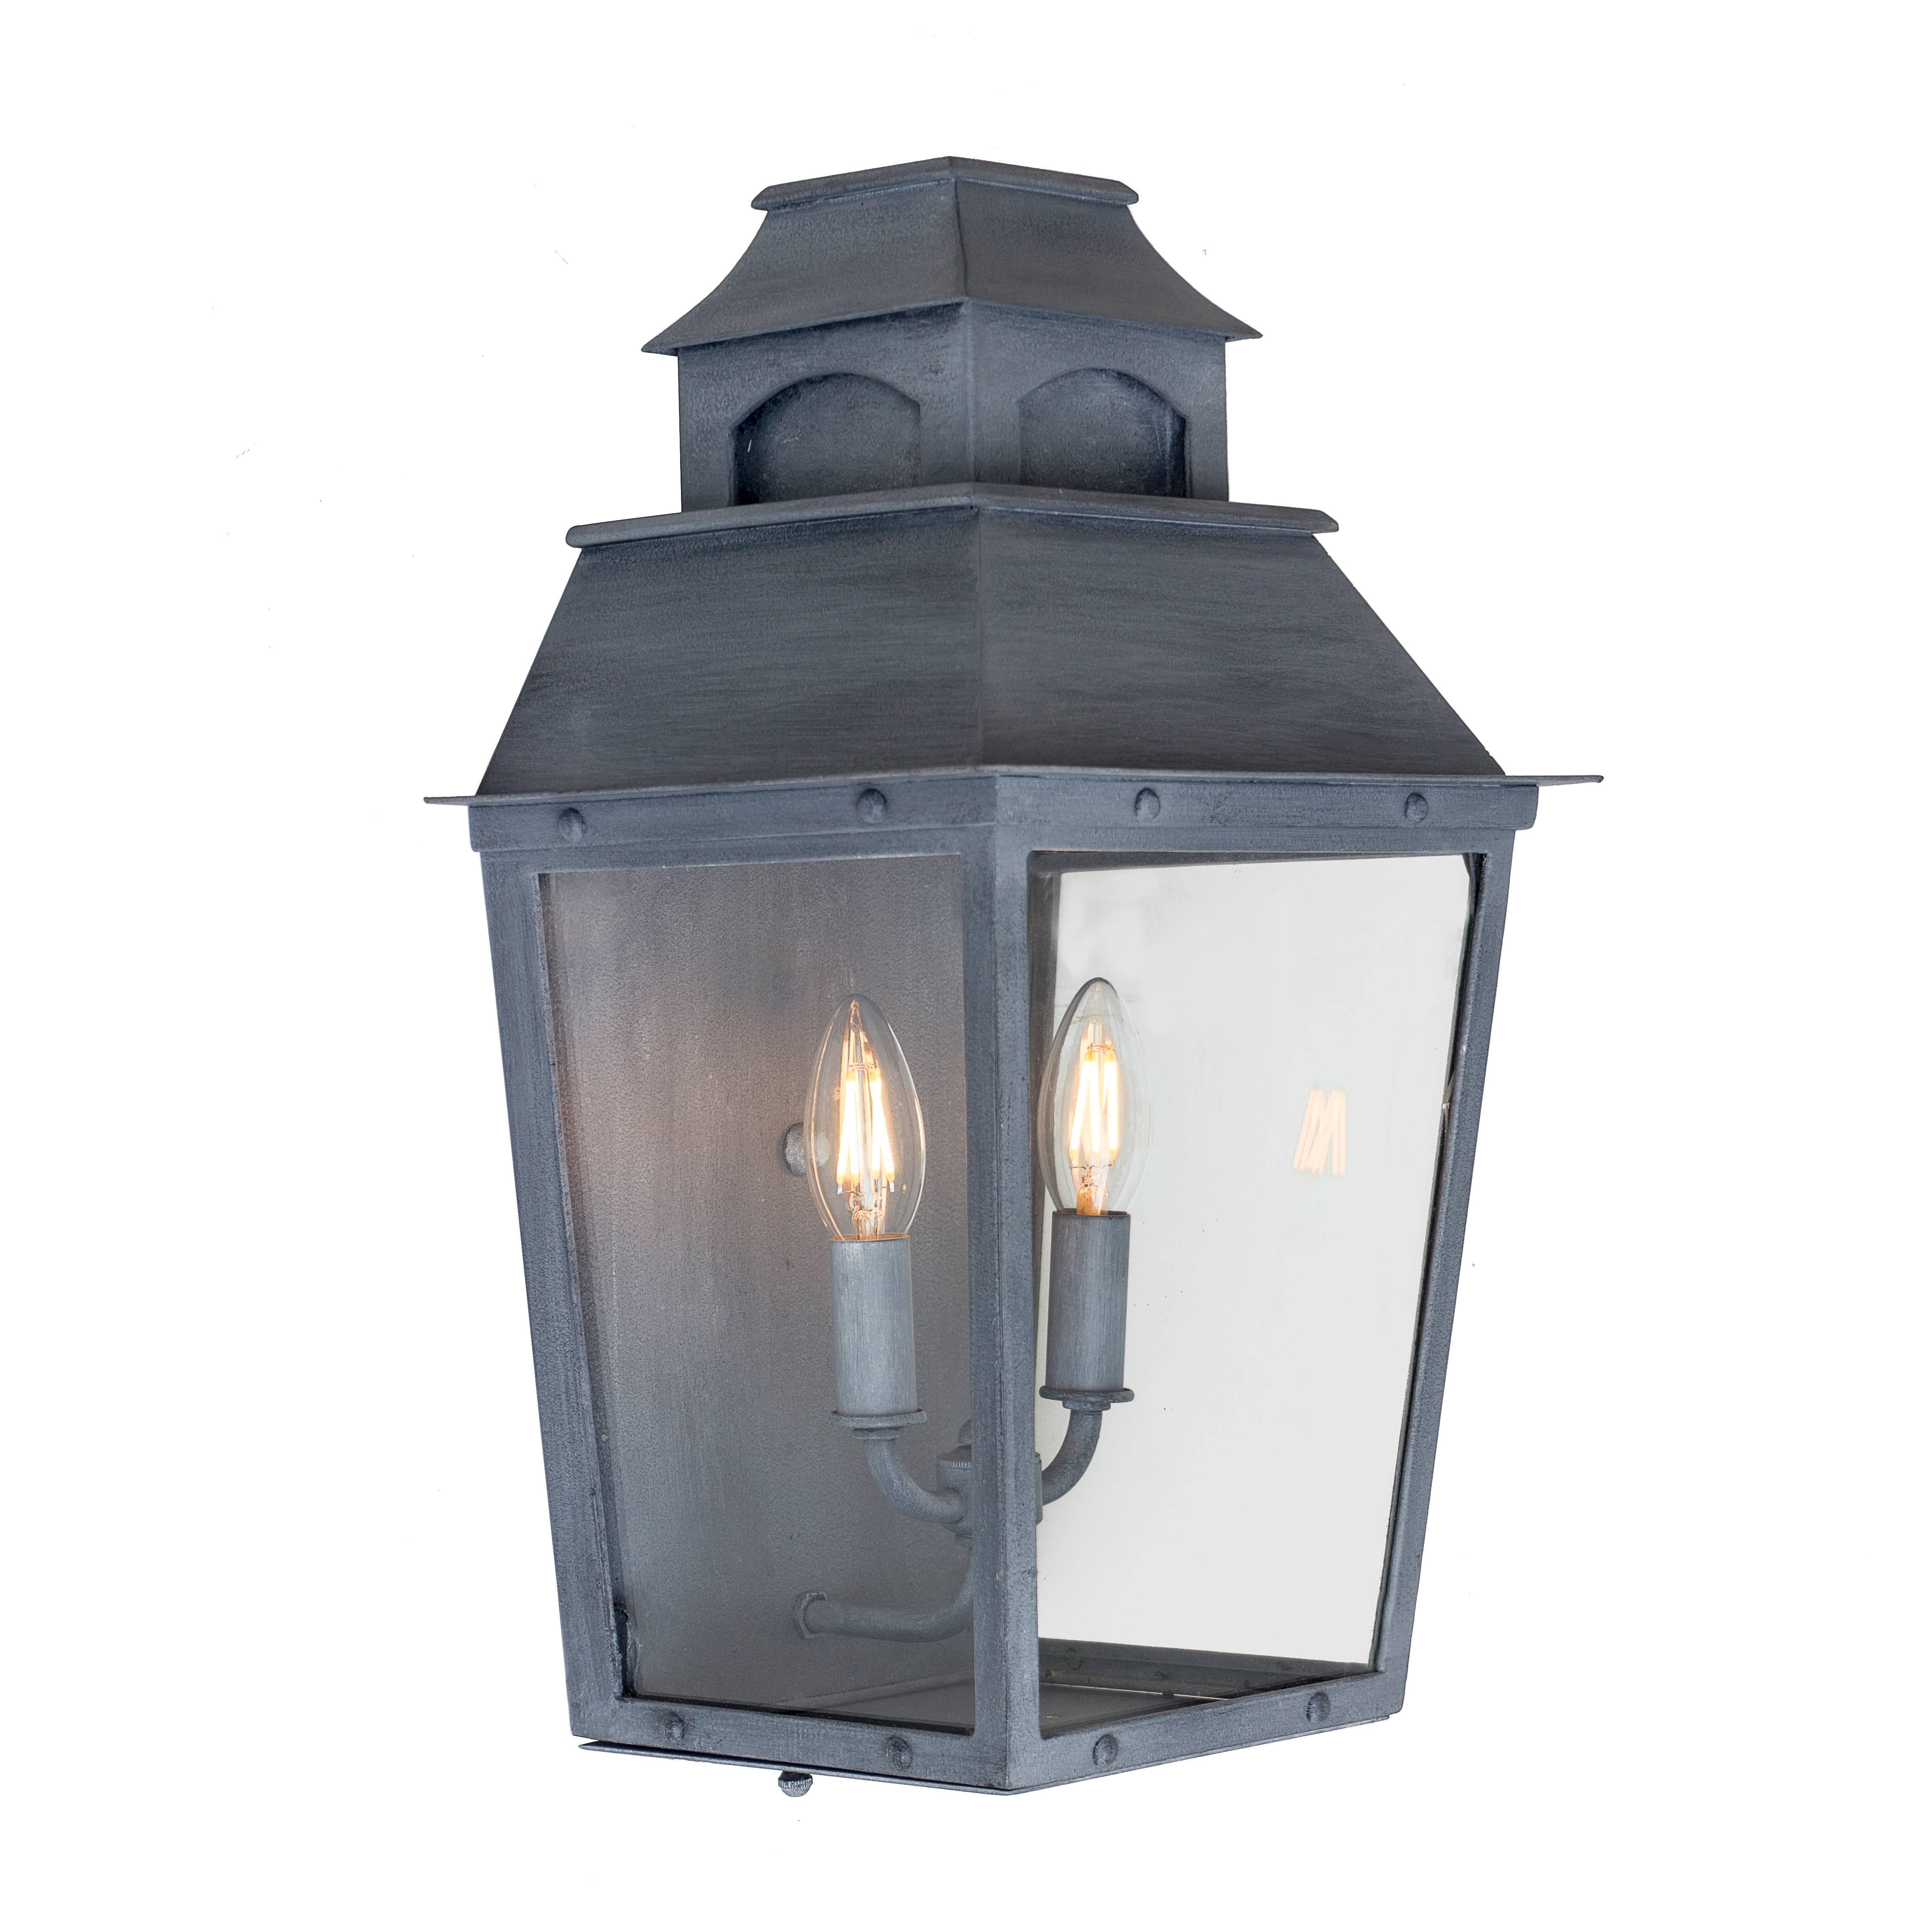 Hand-Crafted Colonial Custom Inspired Wrought Iron Wall Lantern with Premium Zinc Finish For Sale